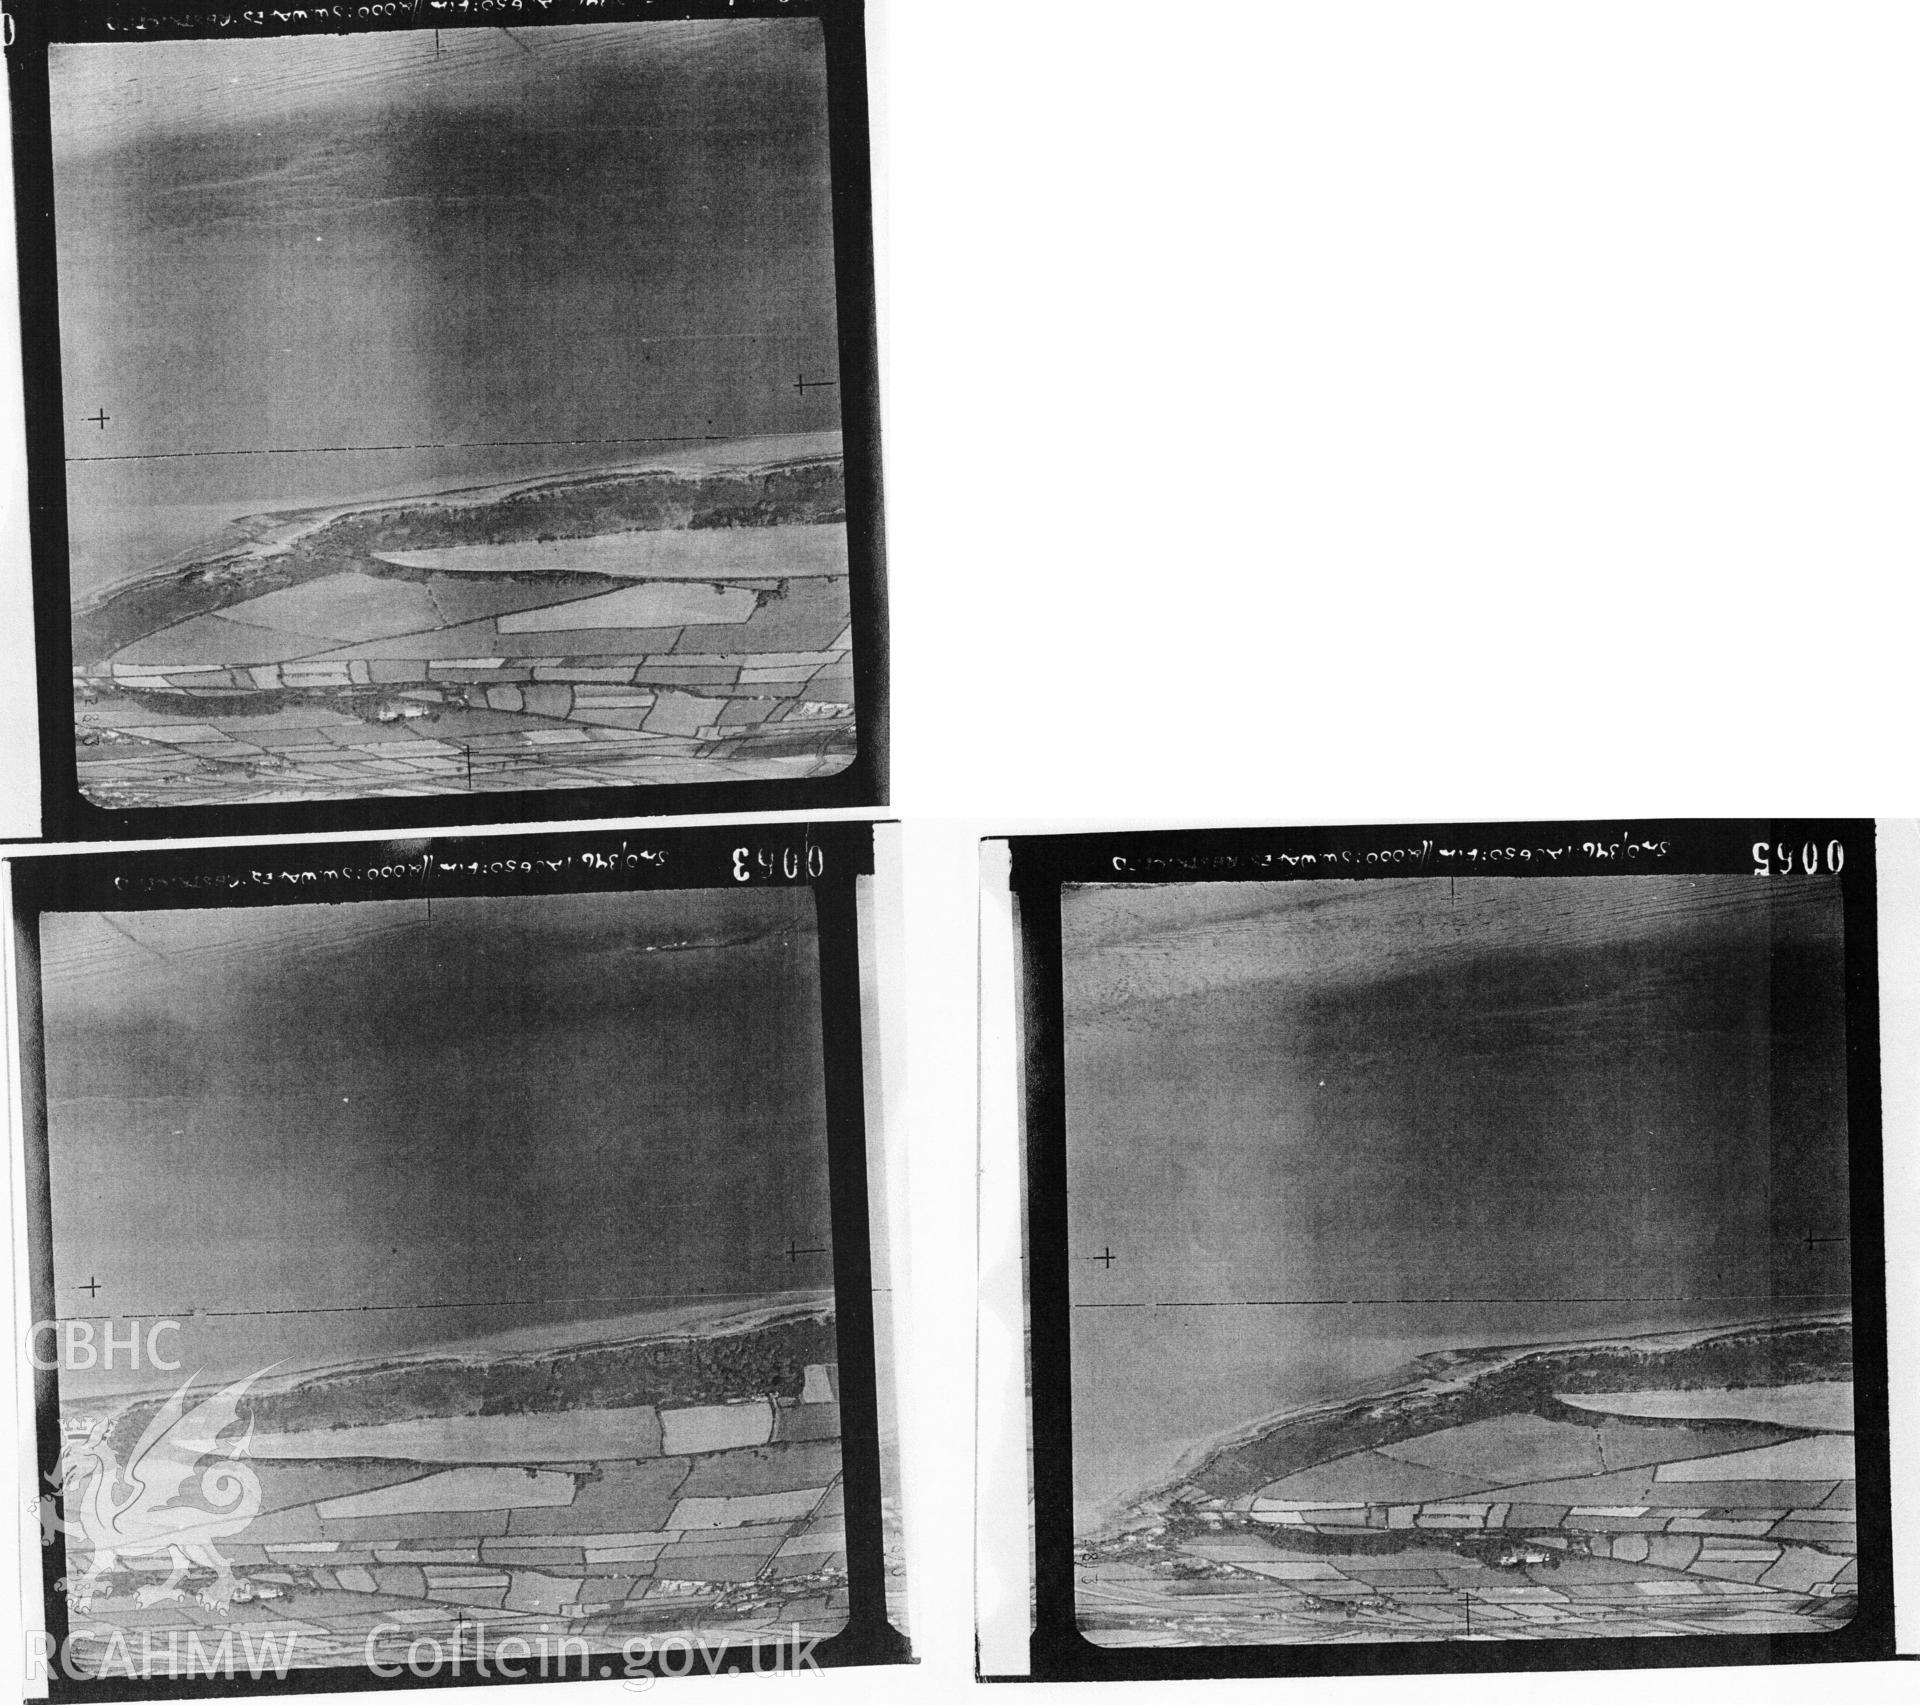 Digital copy of 3 aerial photographs taken in 1950 , showing the assessment area.